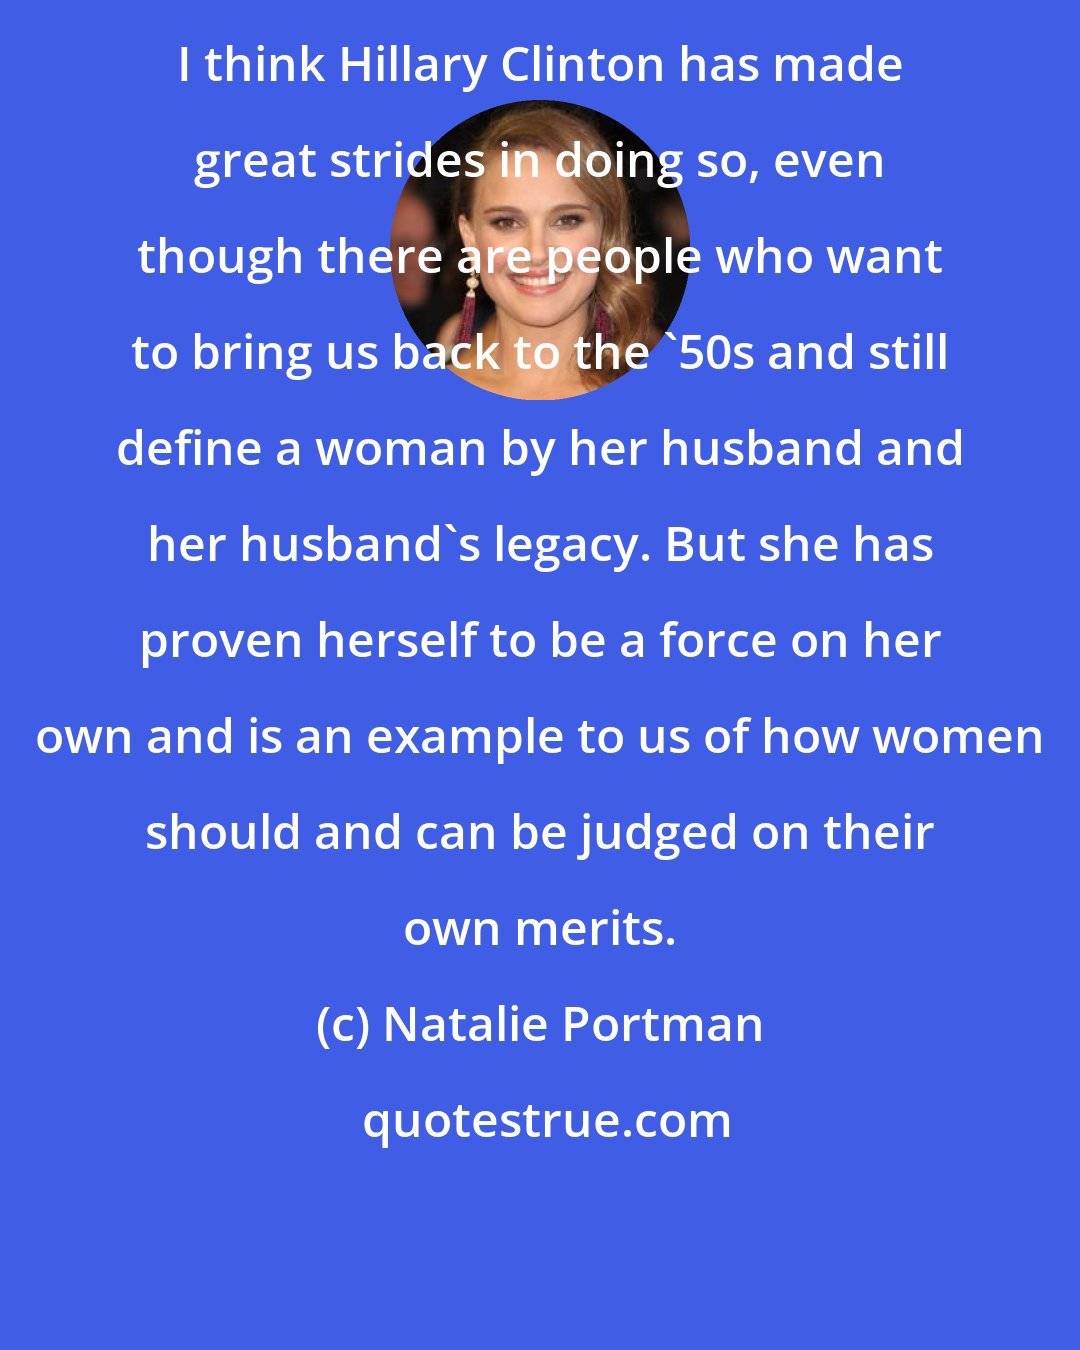 Natalie Portman: I think Hillary Clinton has made great strides in doing so, even though there are people who want to bring us back to the '50s and still define a woman by her husband and her husband's legacy. But she has proven herself to be a force on her own and is an example to us of how women should and can be judged on their own merits.